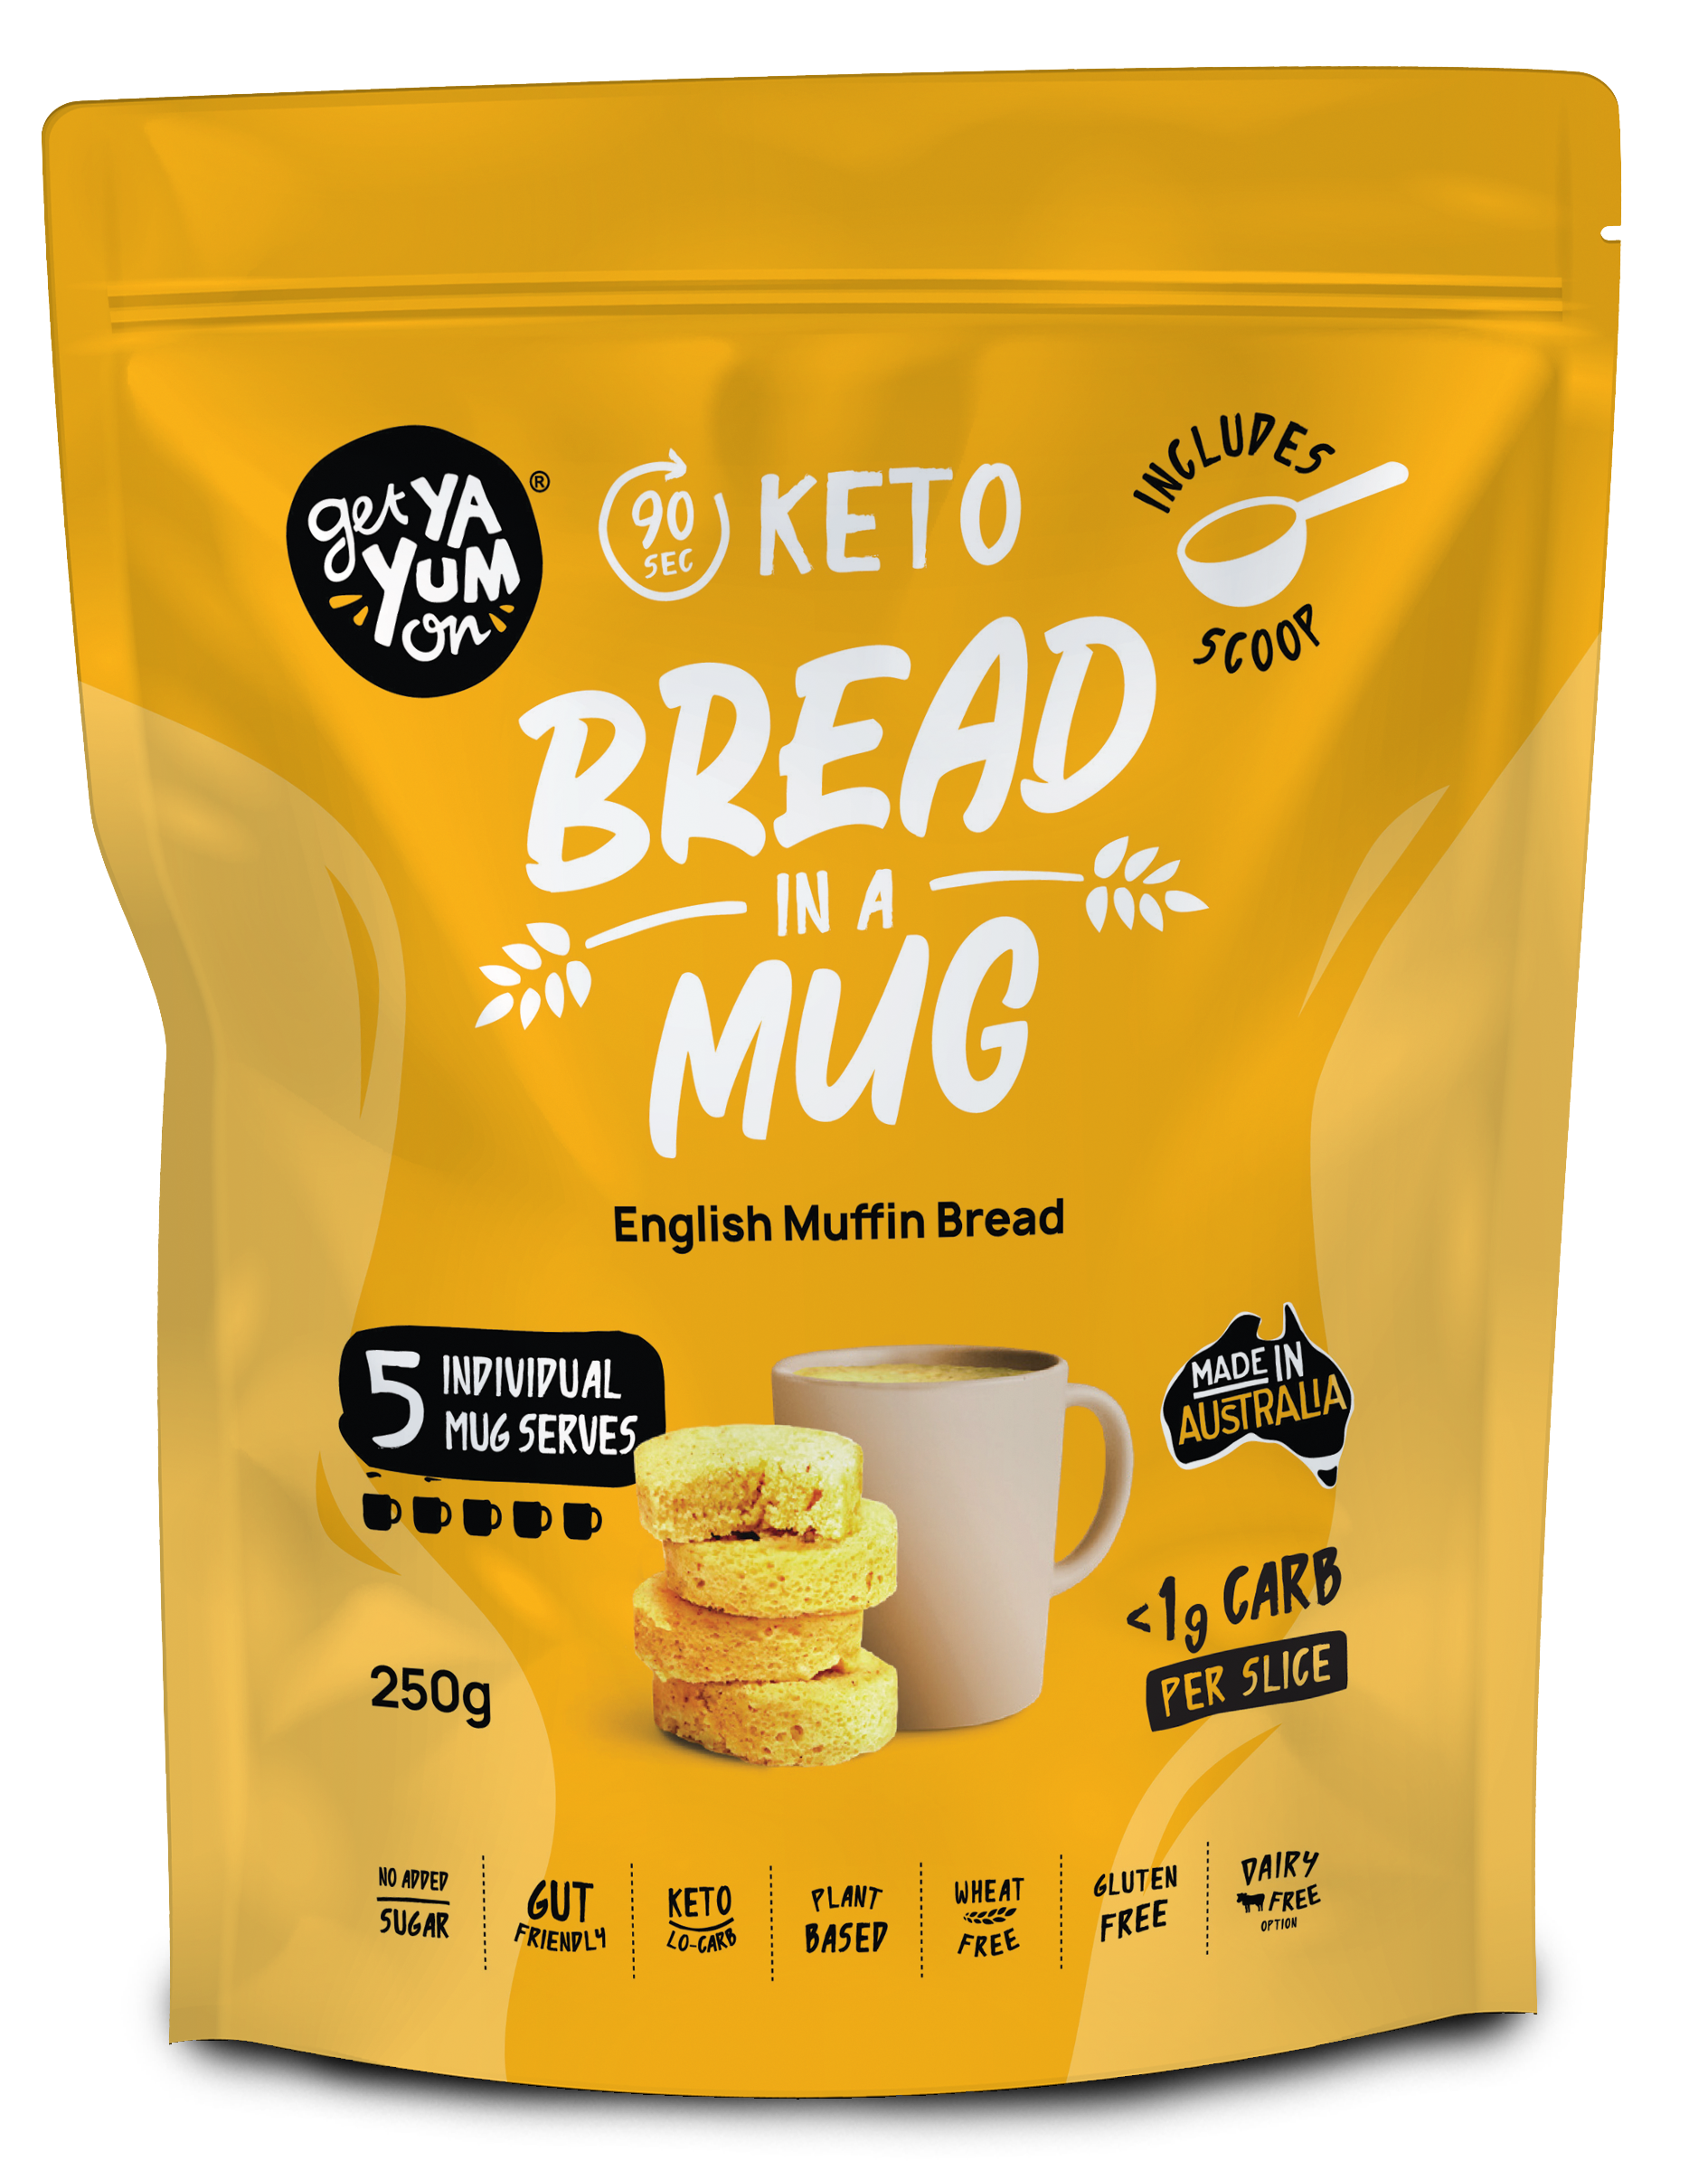 ENGLISH MUFFIN 250gm (5 X Mug Mix VALUE PACK (with scoop!)